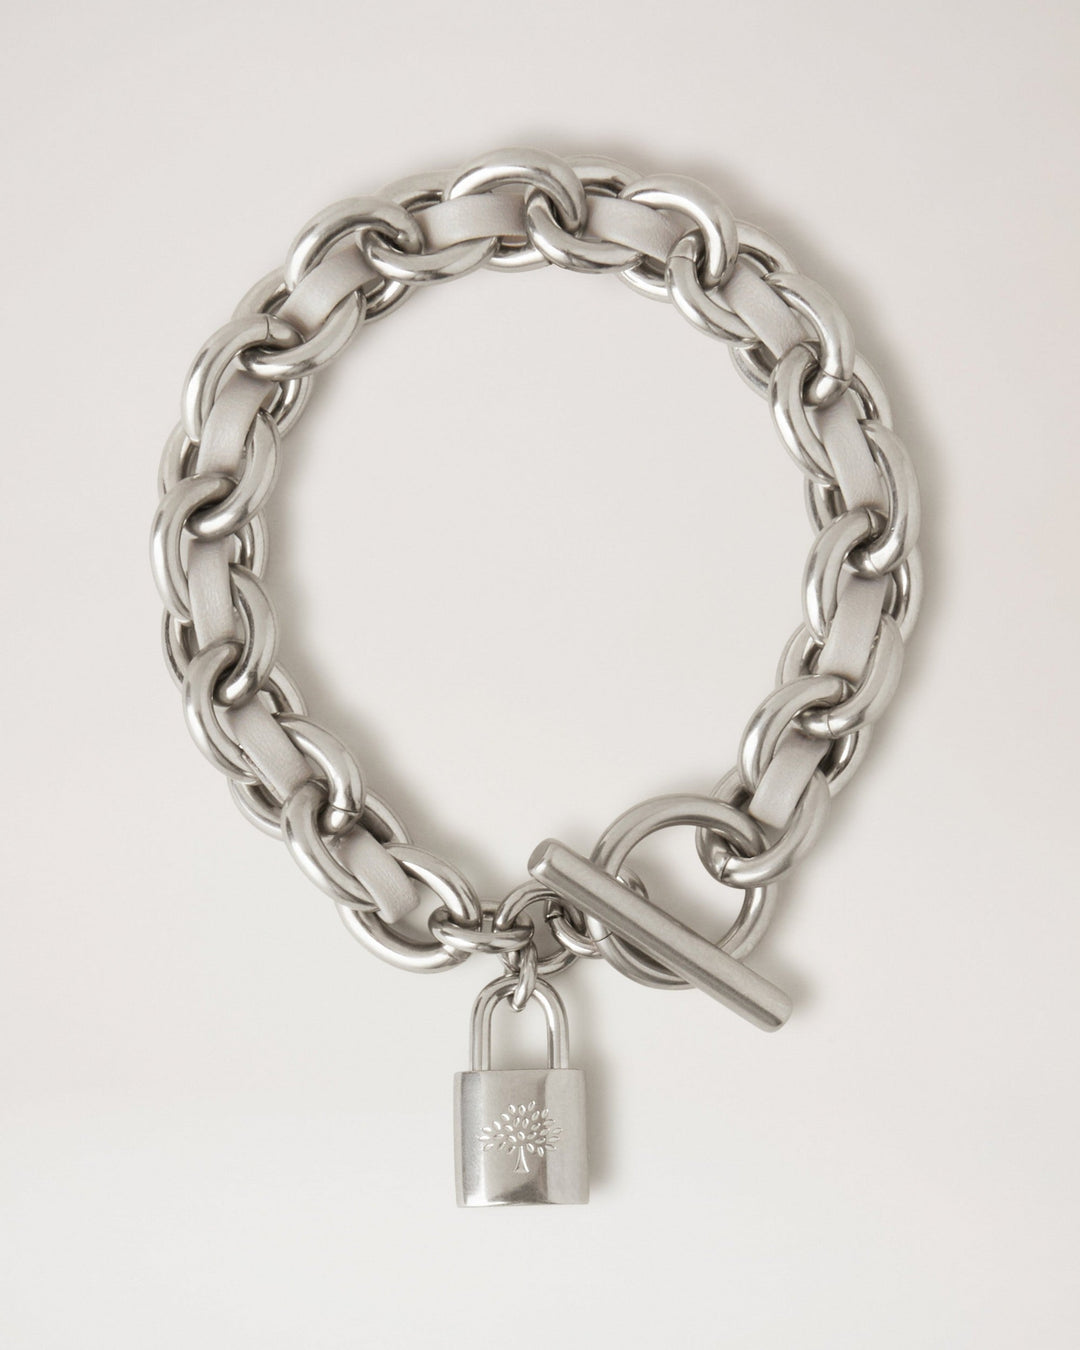 Lily Leather Chain Bracelet Small Pale Grey Silky Calf & Silver Plated Stainless